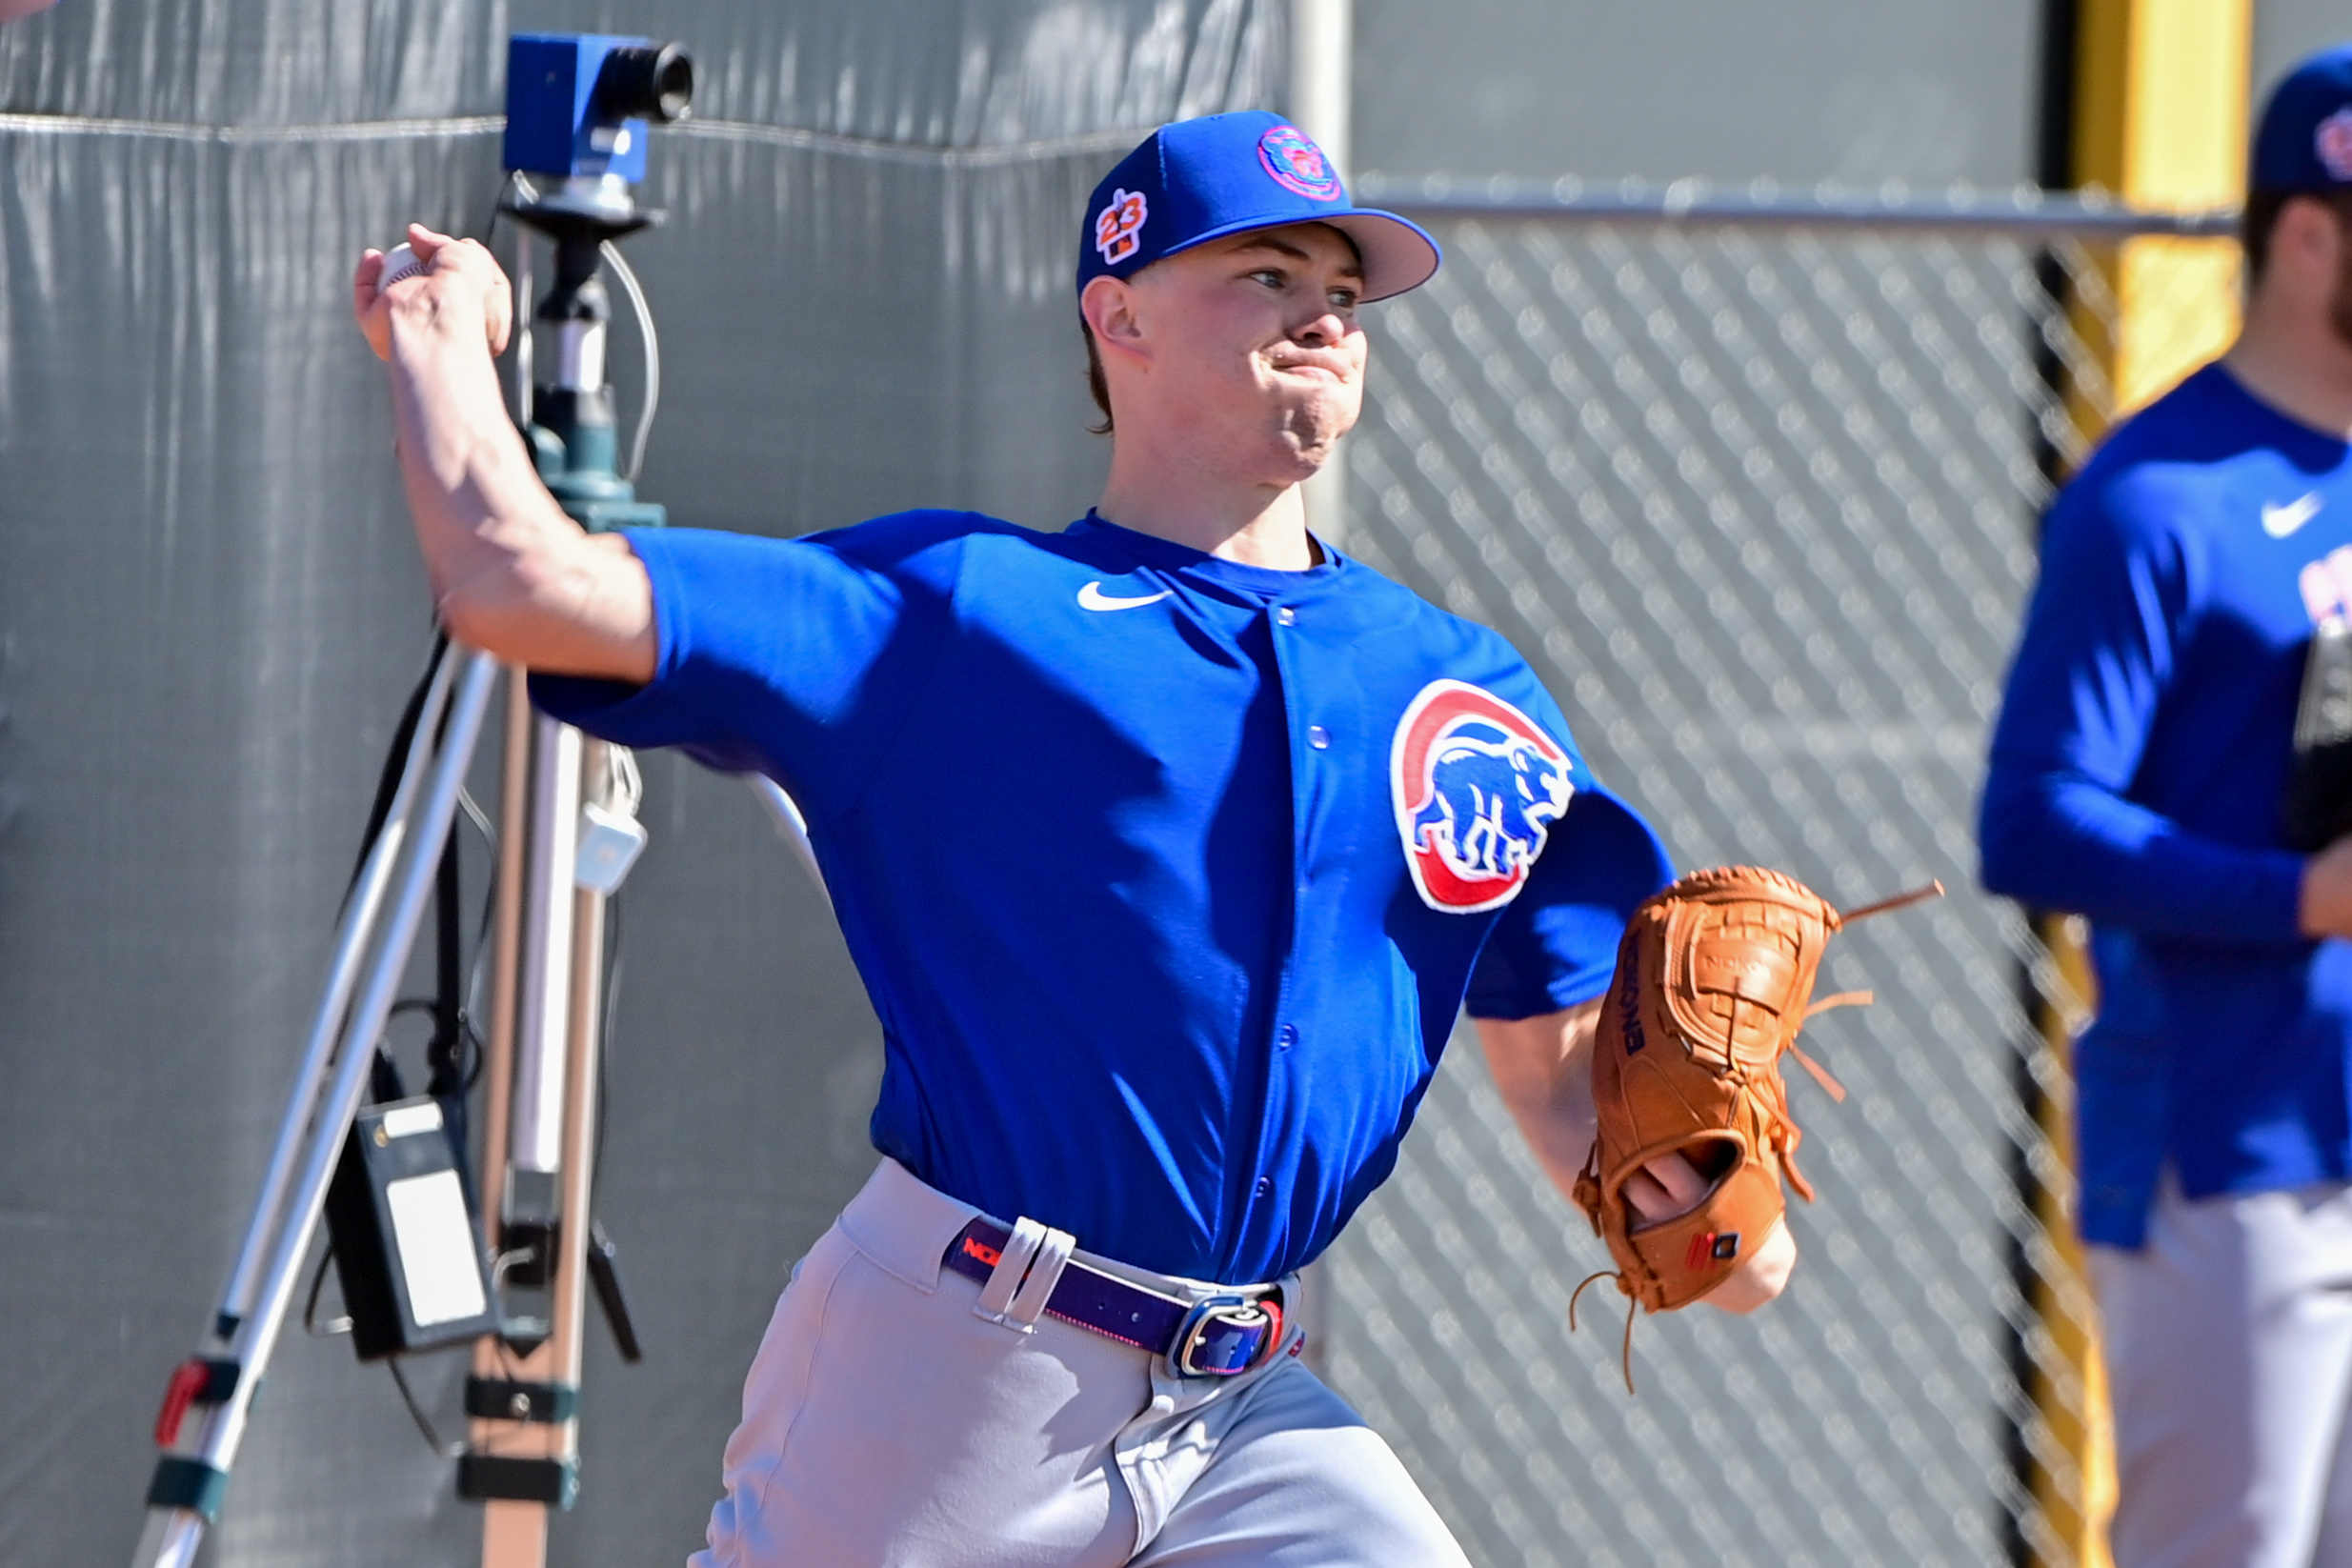 When does Cubs spring training start?